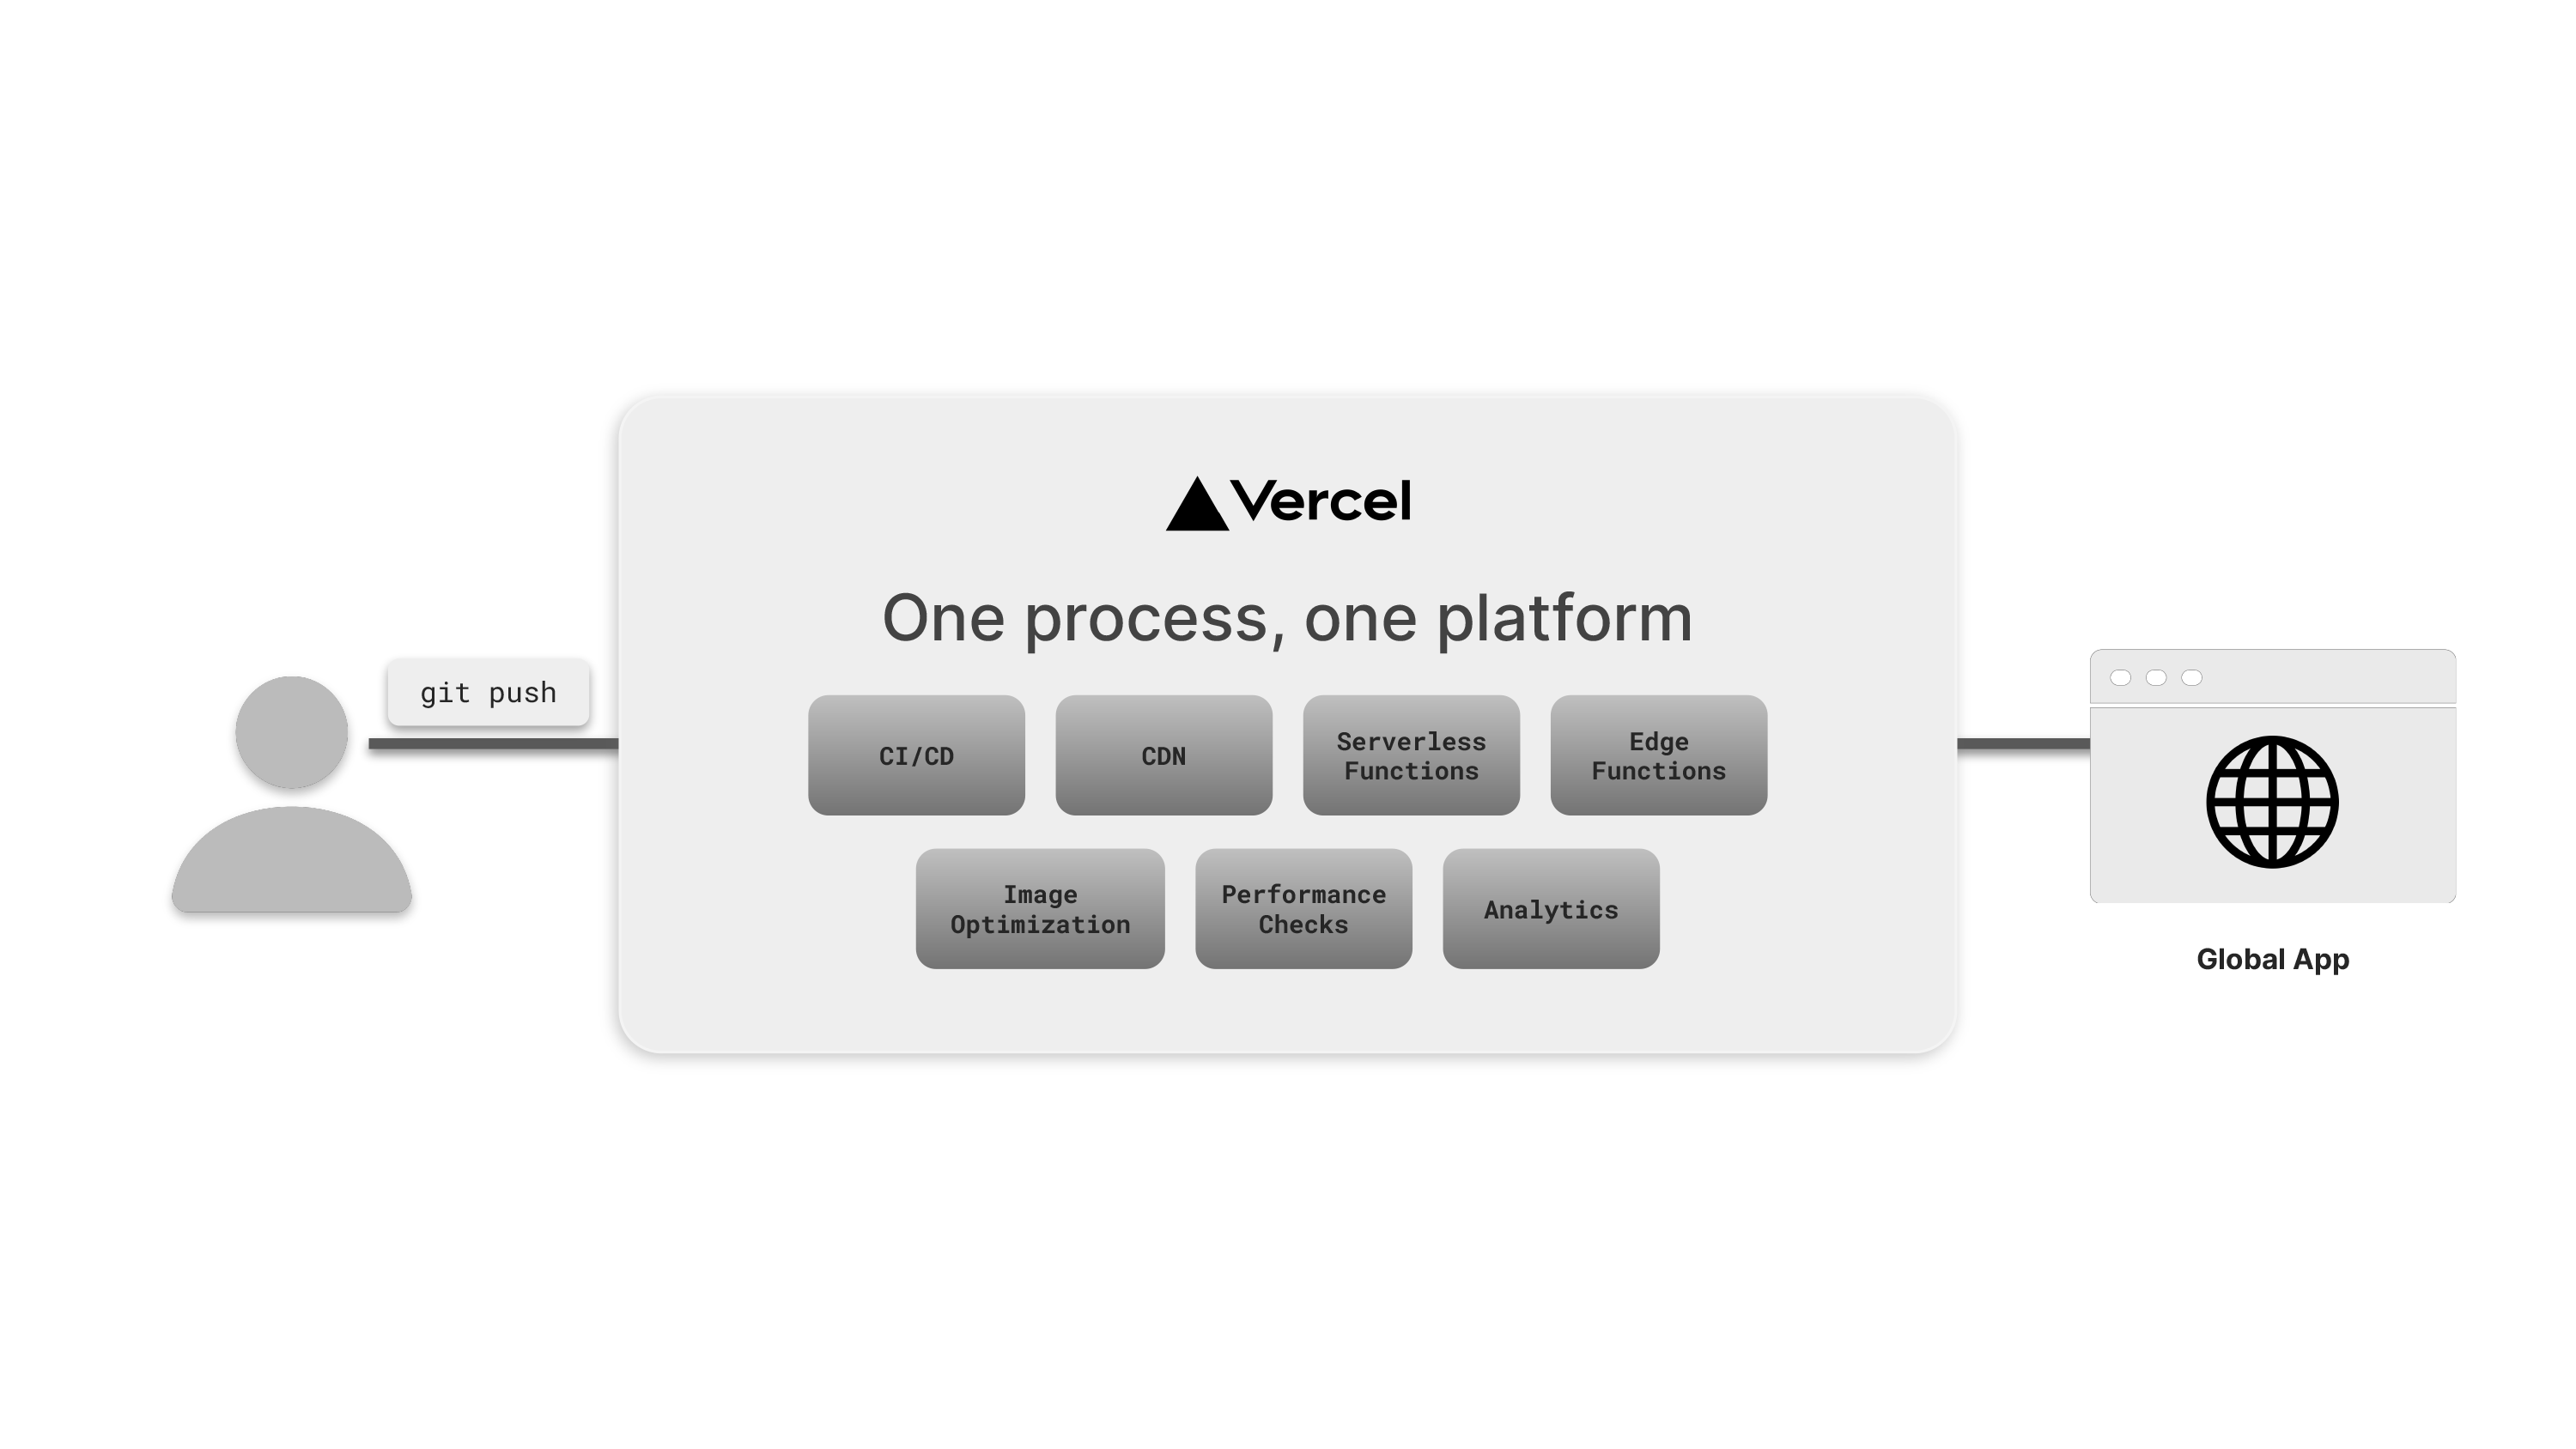 Vercel provides one unified process, instead of developers needing to balance CDNs, clusters, functions, caching infrastructure, and more. 